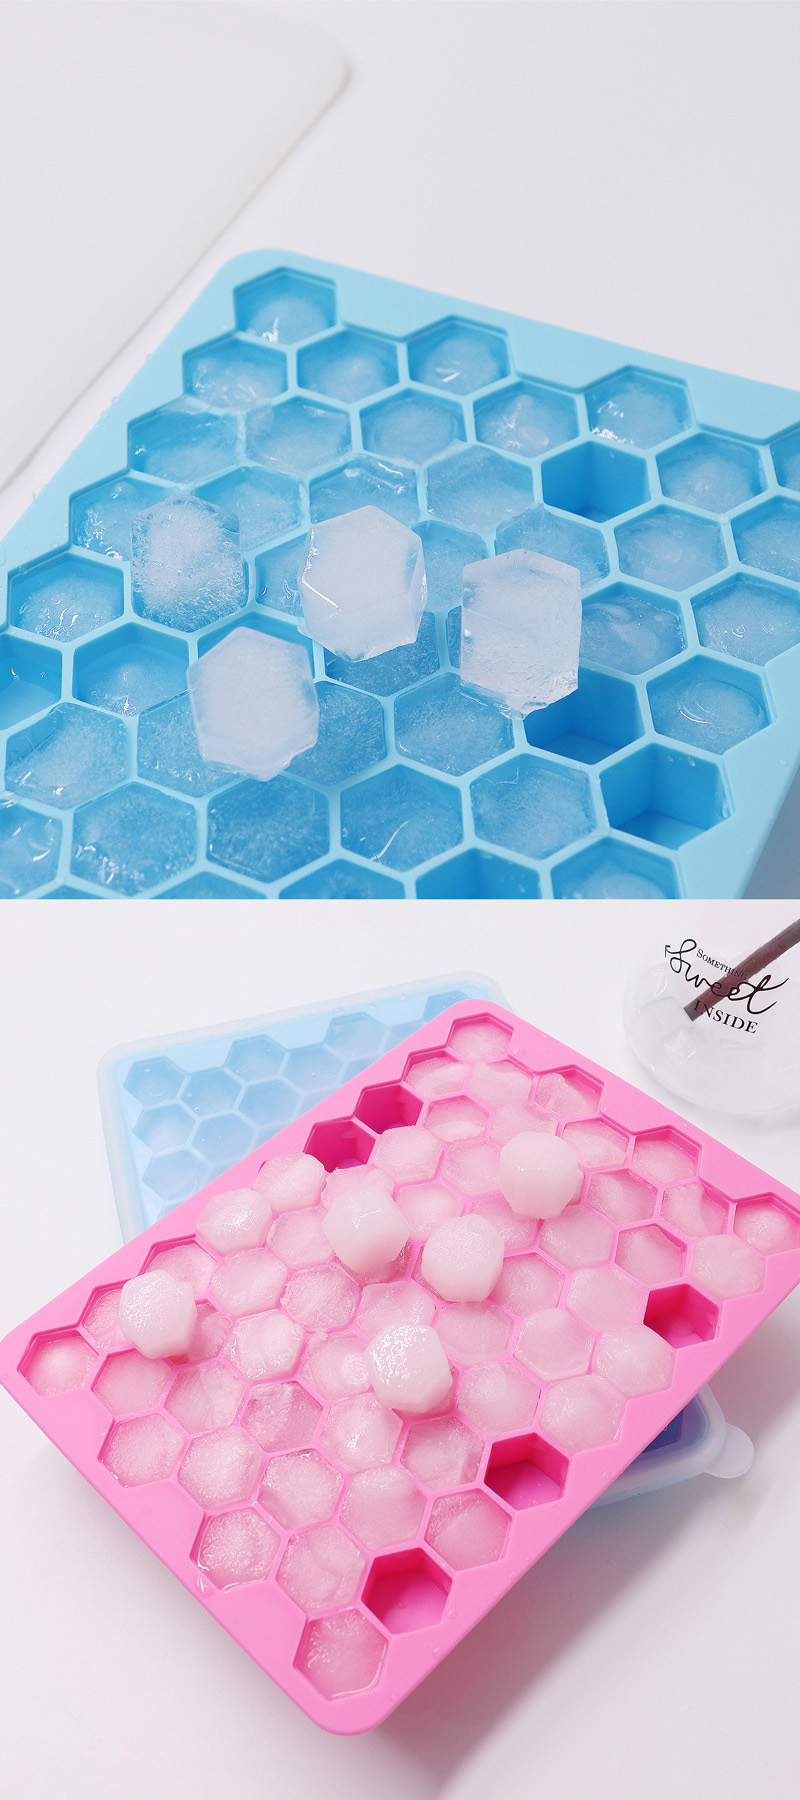 Silicone Ice Cube Maker Logo Aanpasbare Silicone Ice Cube Tray Ice Mold met deksel